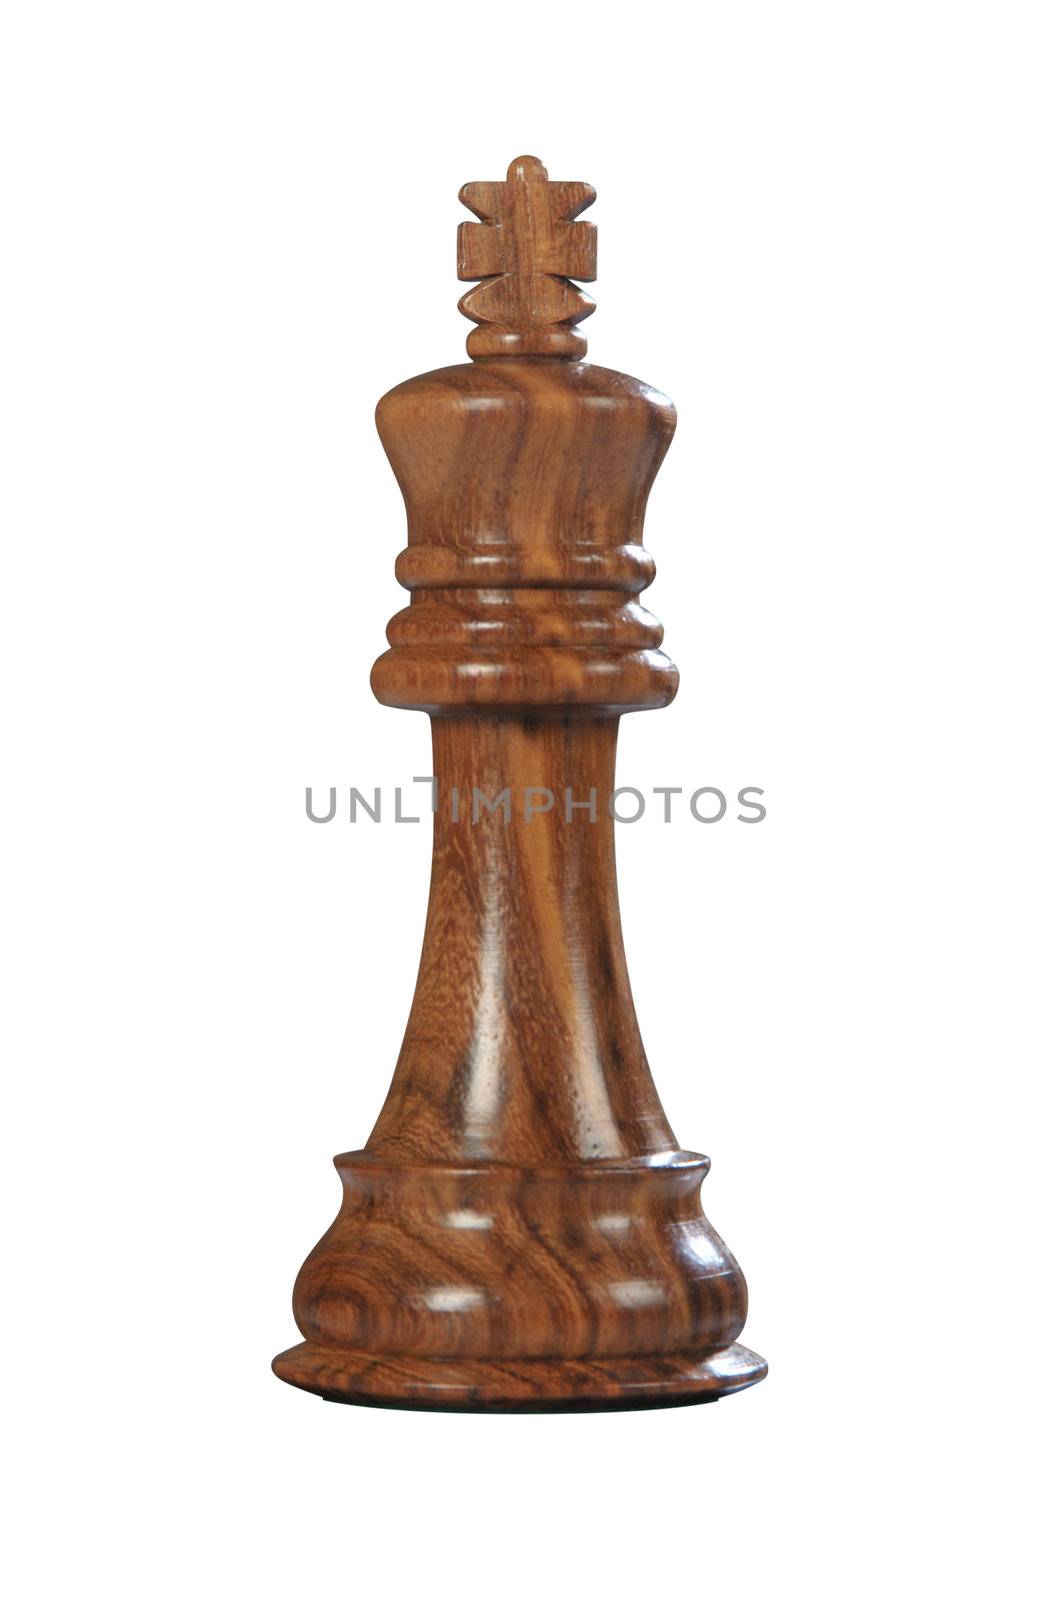 Black (Brown) wooden king - one of 12 different chess pieces